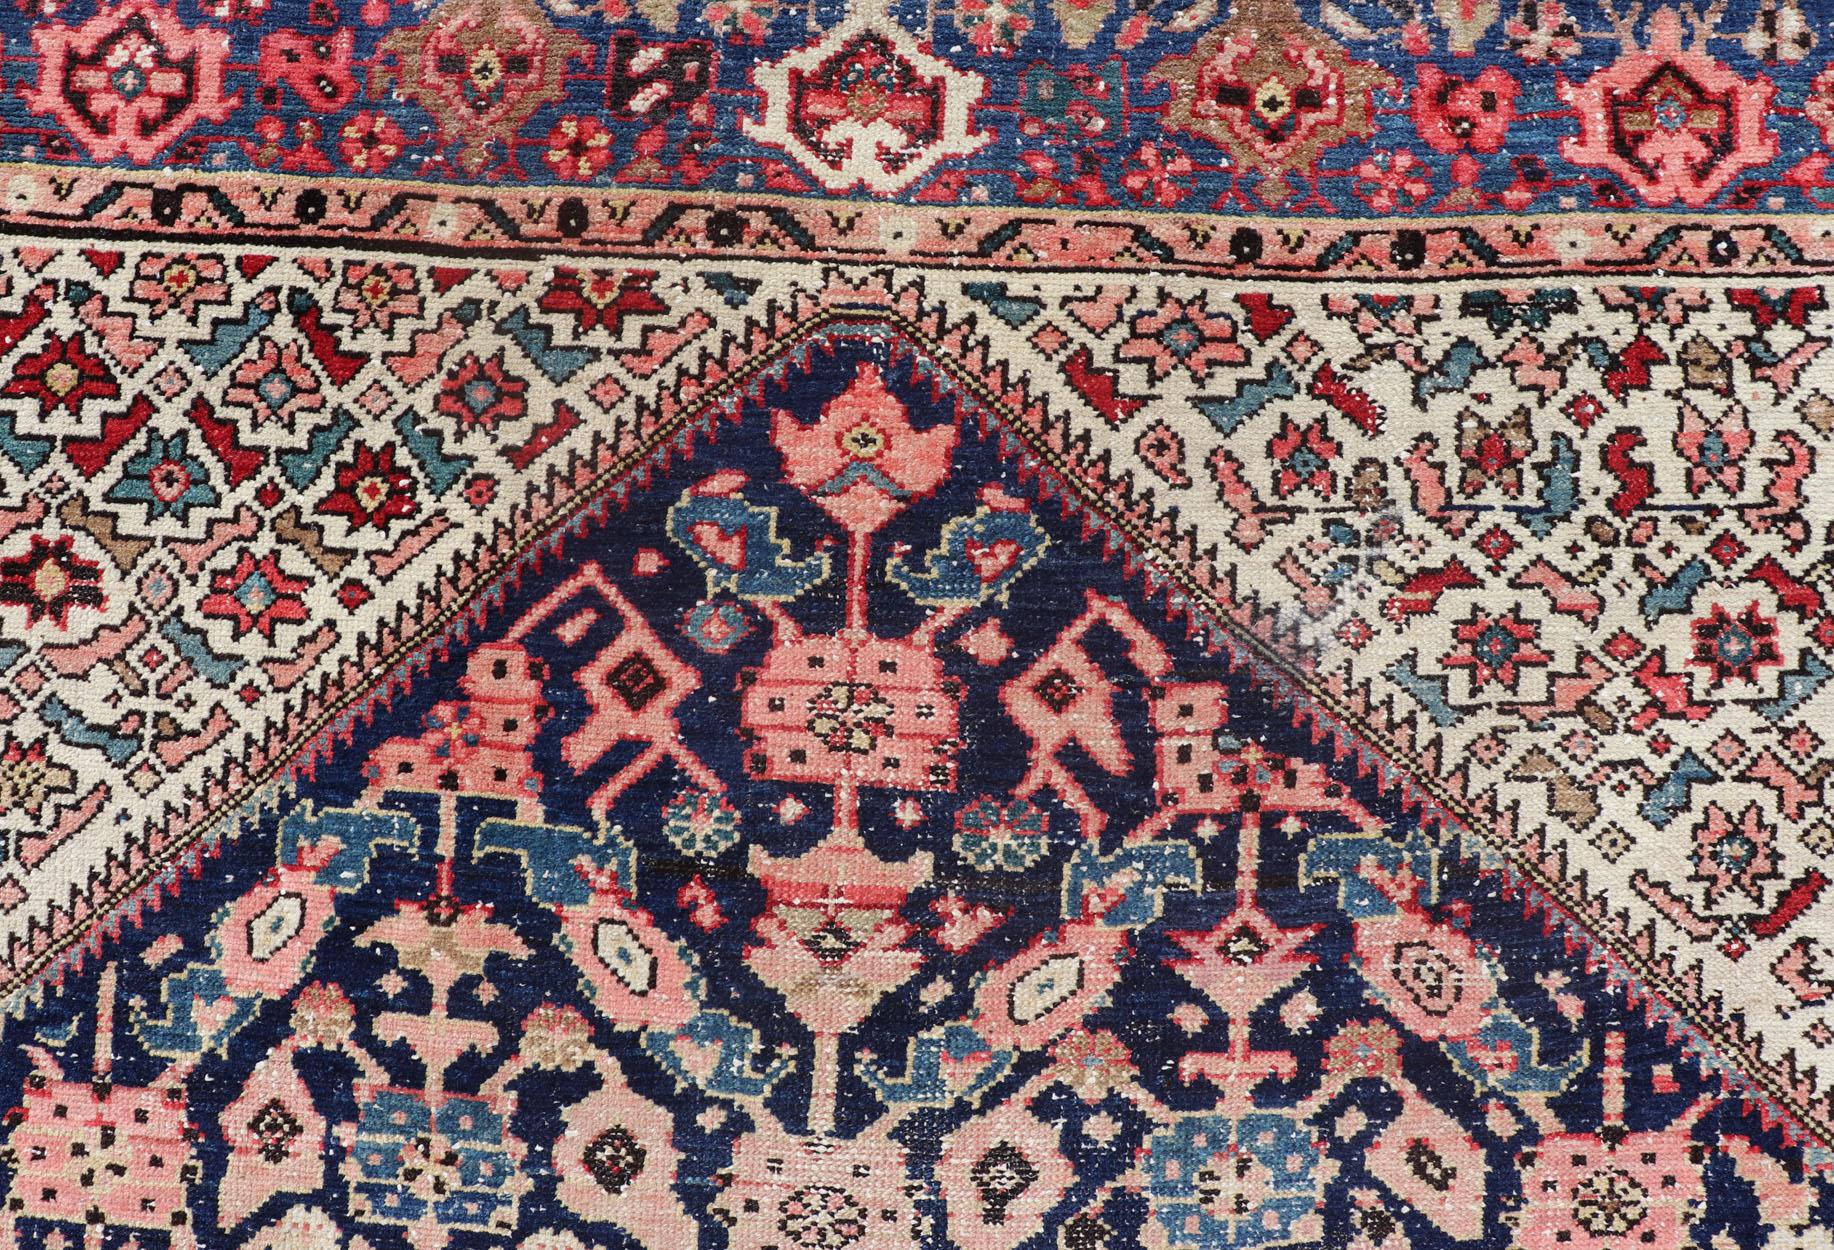 Multicolored antique Persian Malayer gallery rug with geometric Herati motifs, rug EMB-8513-178293, country of origin / type: Iran / Malayer, circa 1910.

This lovely antique Persian distressed Malayer gallery rug originates from the northwest